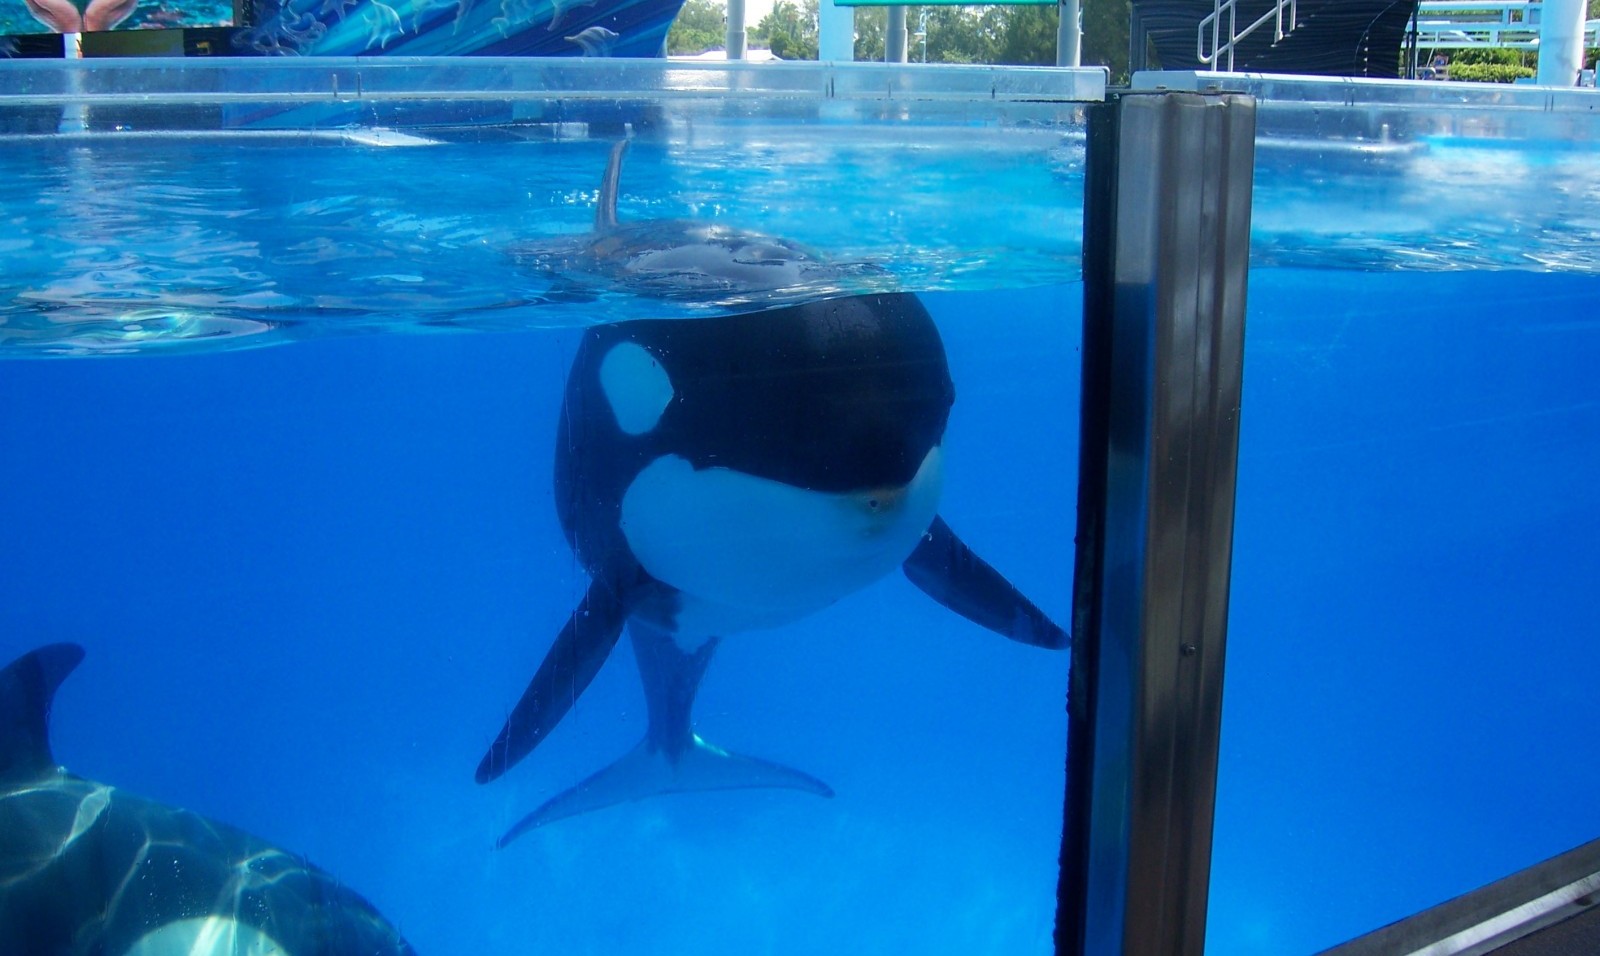 traumatic experiences orcas know all too well